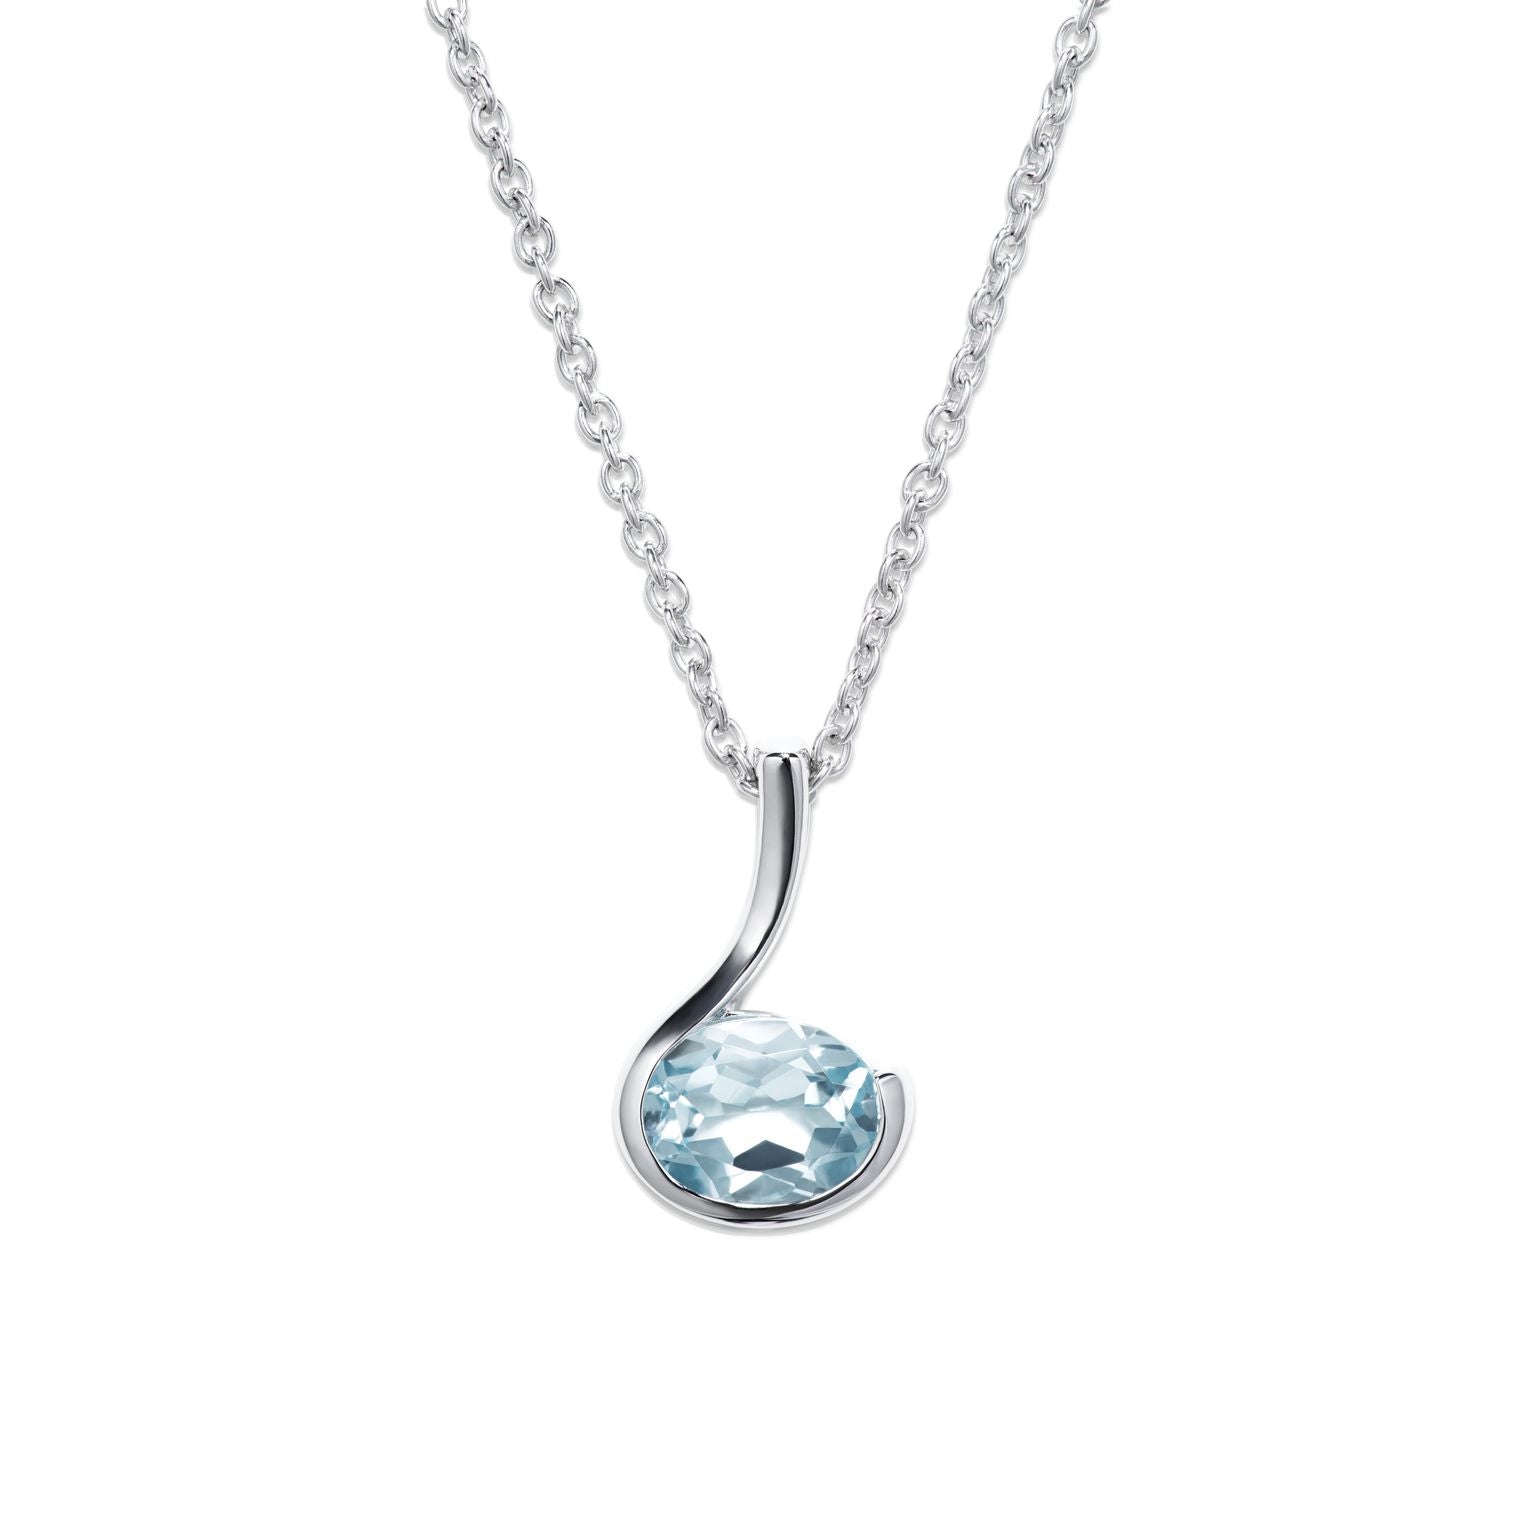 Silver Swirl Pendant with Faceted Blue Topaz